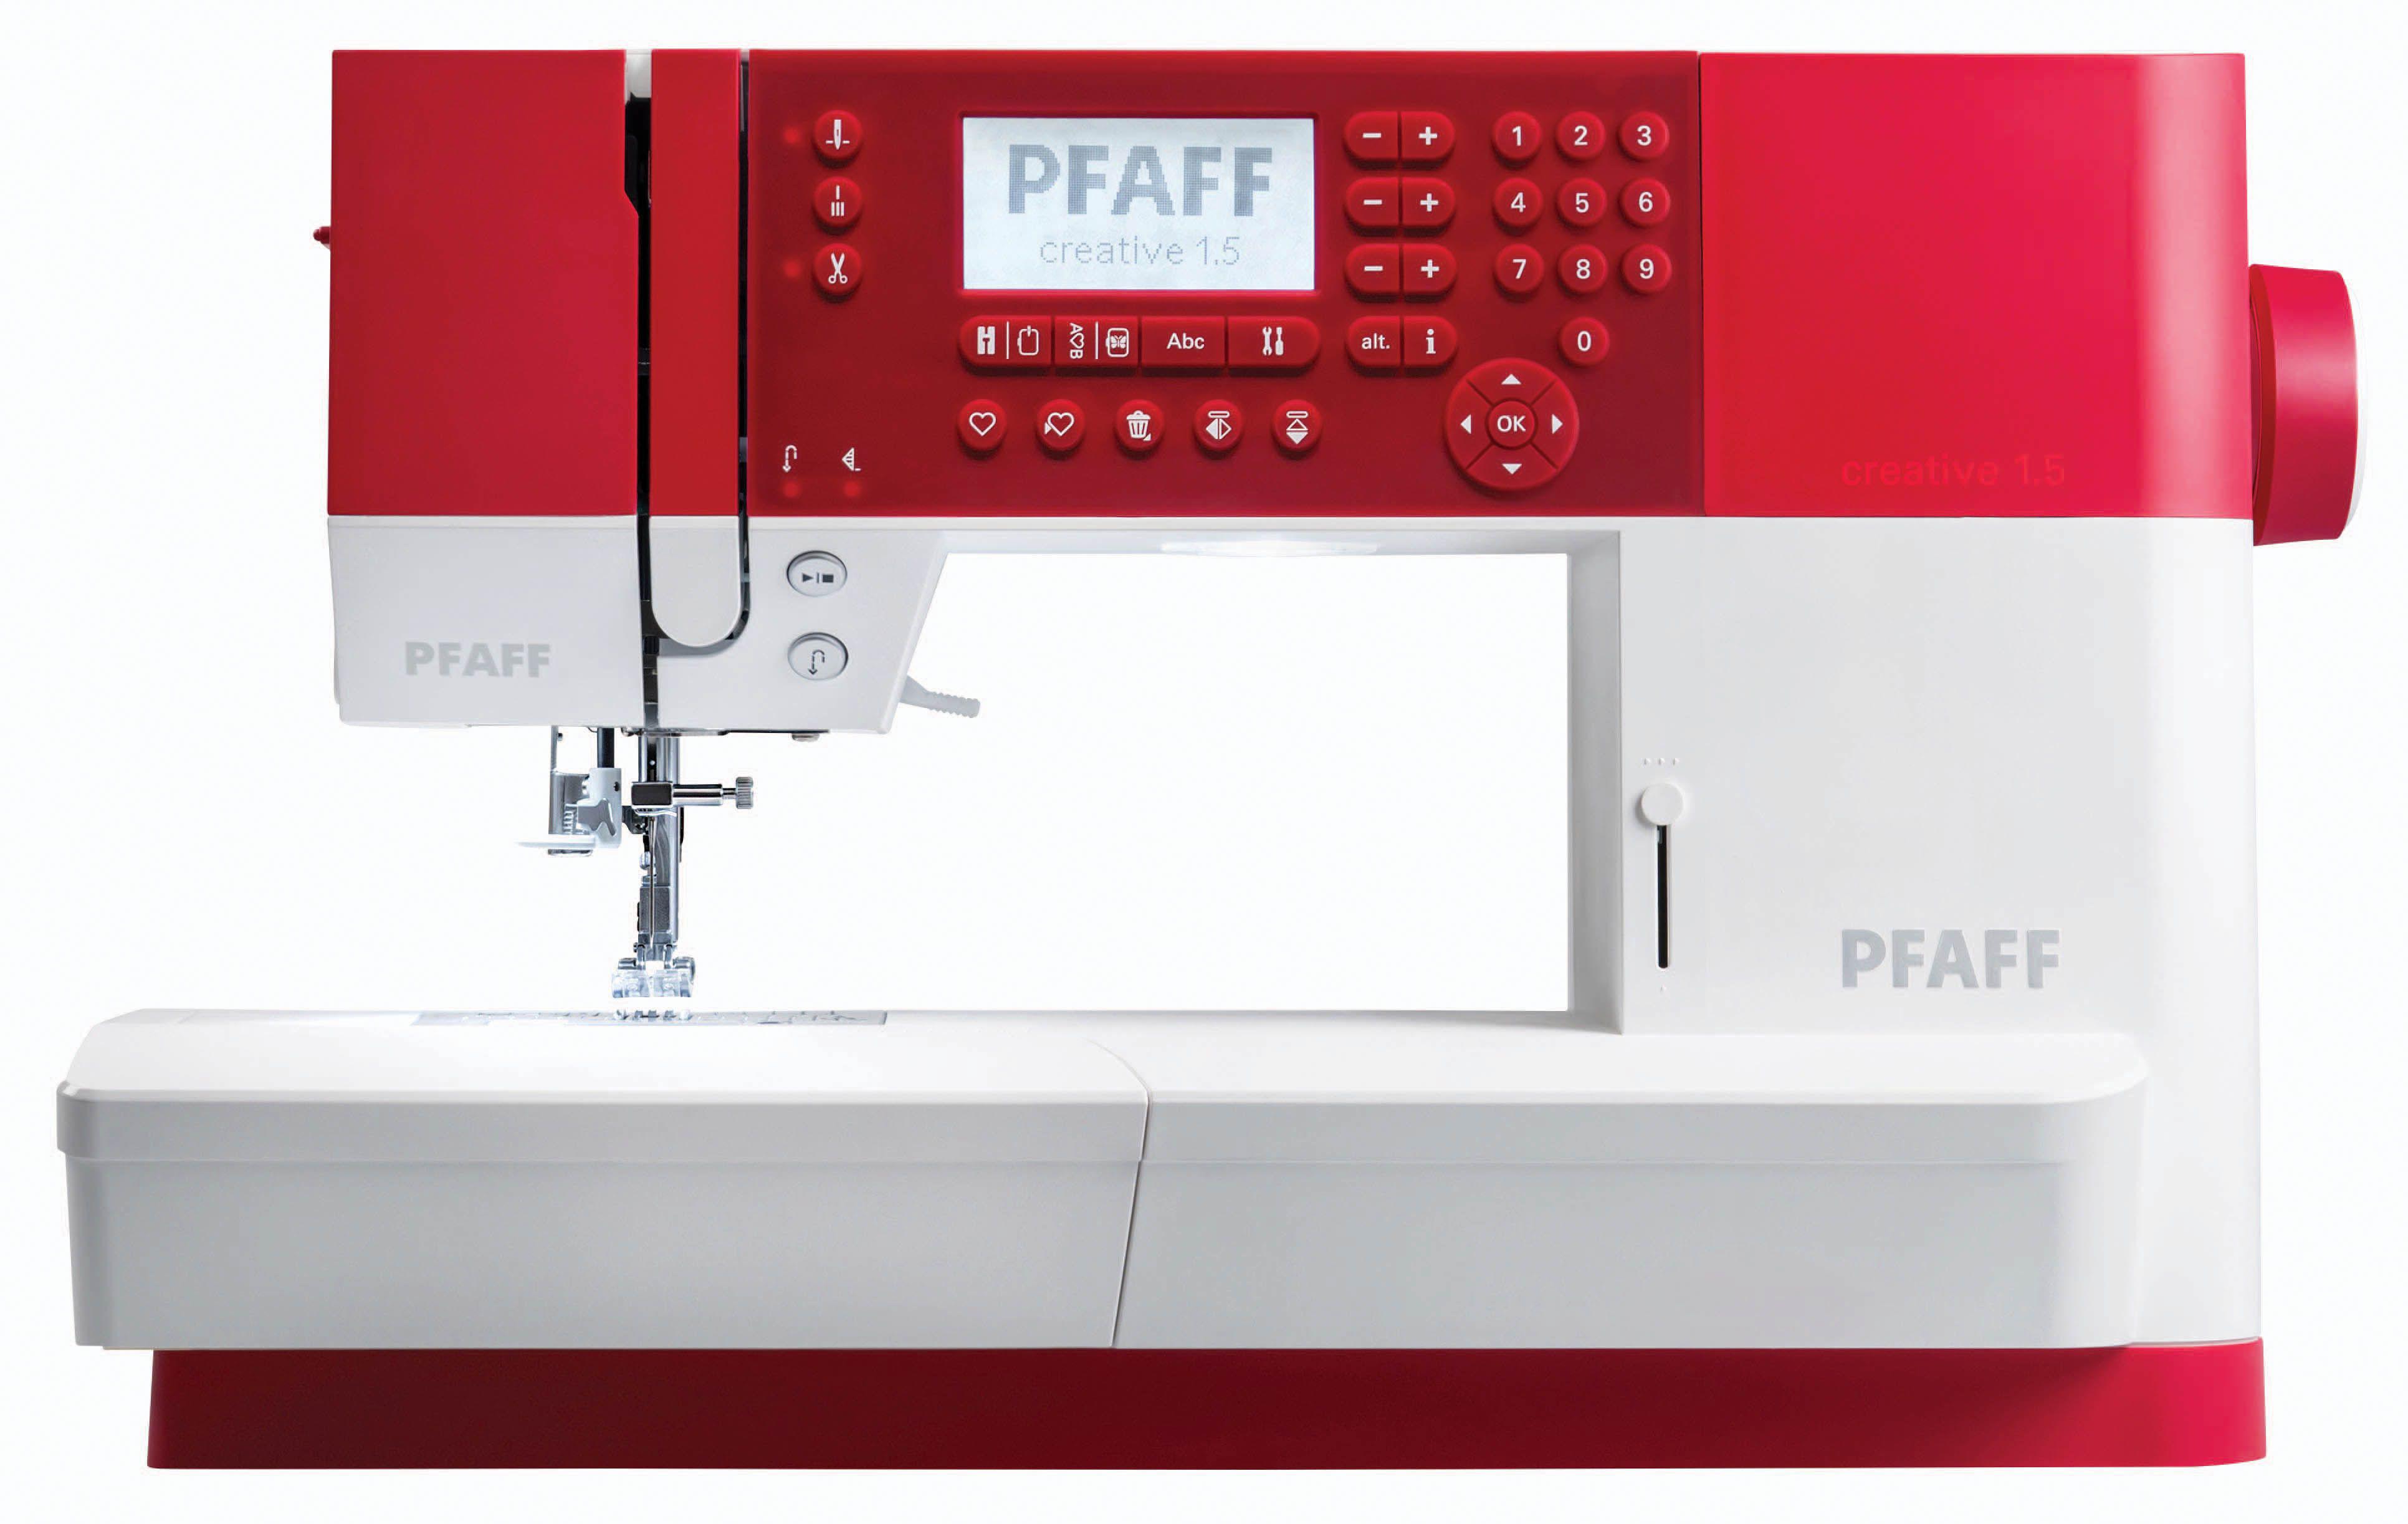 Whether you’re looking to upgrade your current machine or want to try a new hobby altogether, we have the machine that will provoke inspiration and allow you to take your craft to the next level! Contact us today to order your Pfaff or Husqvarna sewing, embroidery or quilting machine and for special in-store pricing. A FREE lesson is included with your sewing machine purchase. Used machines are also available in-store.